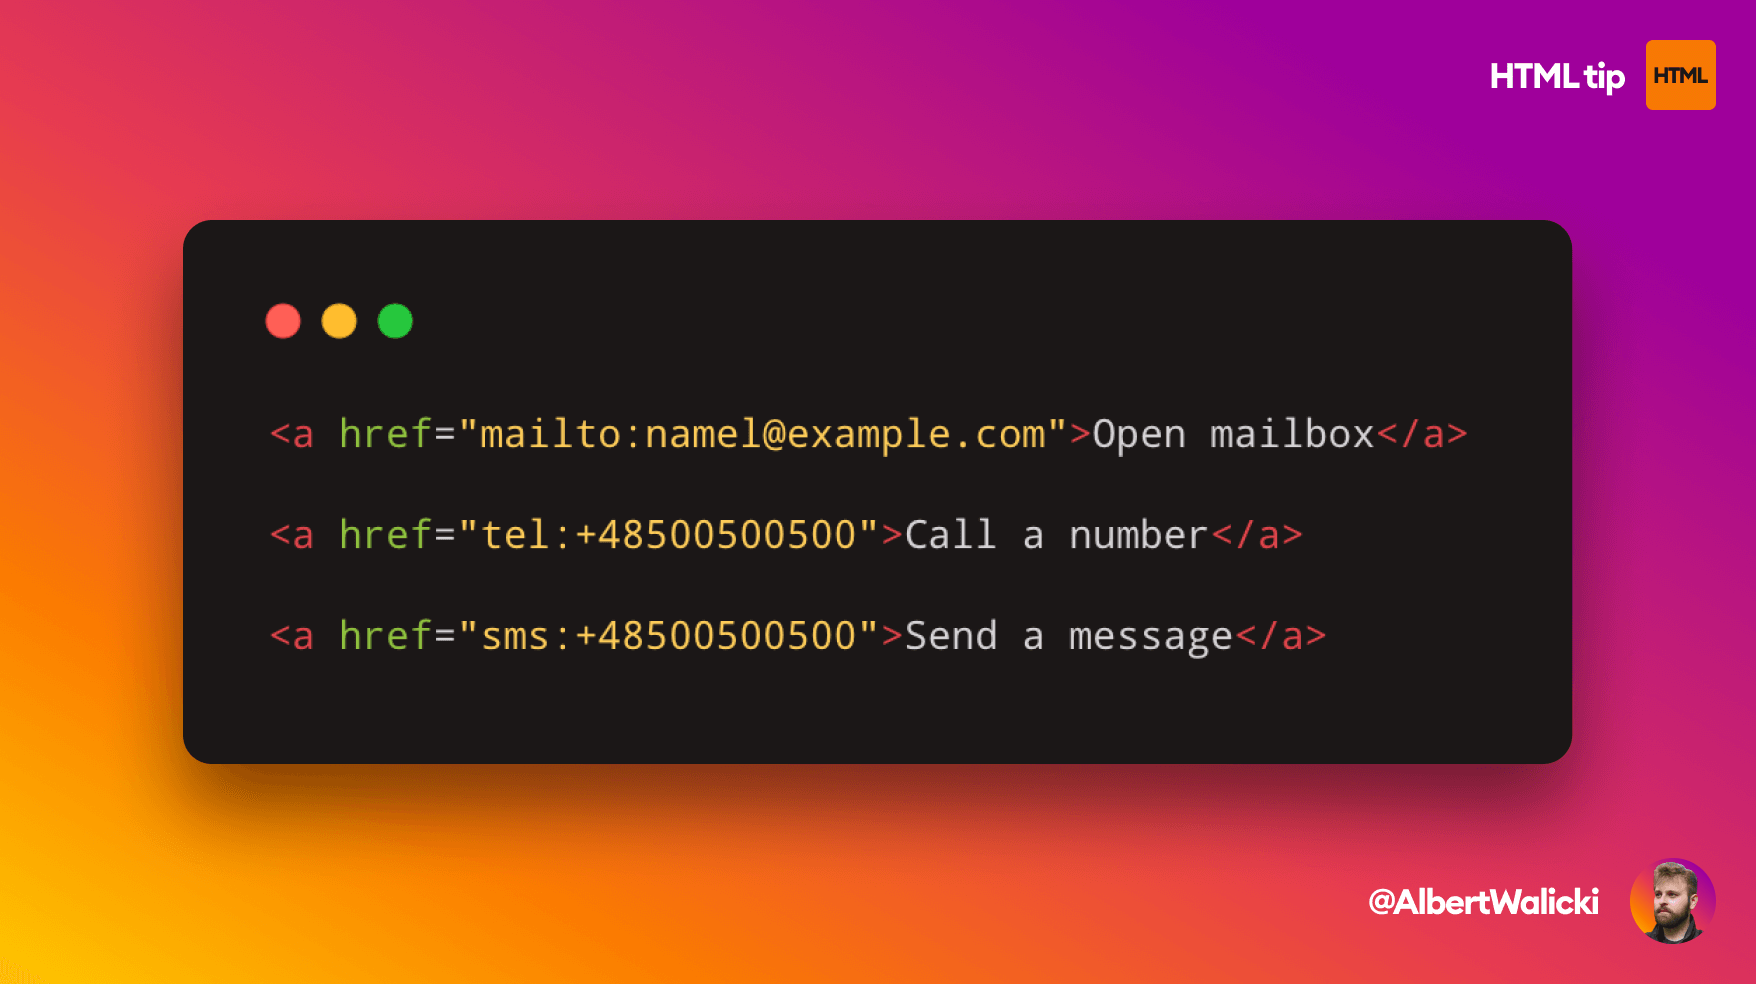 Anchor tags allows to open different apps and do amazing stuff. For example mailbox, call a number, send a message